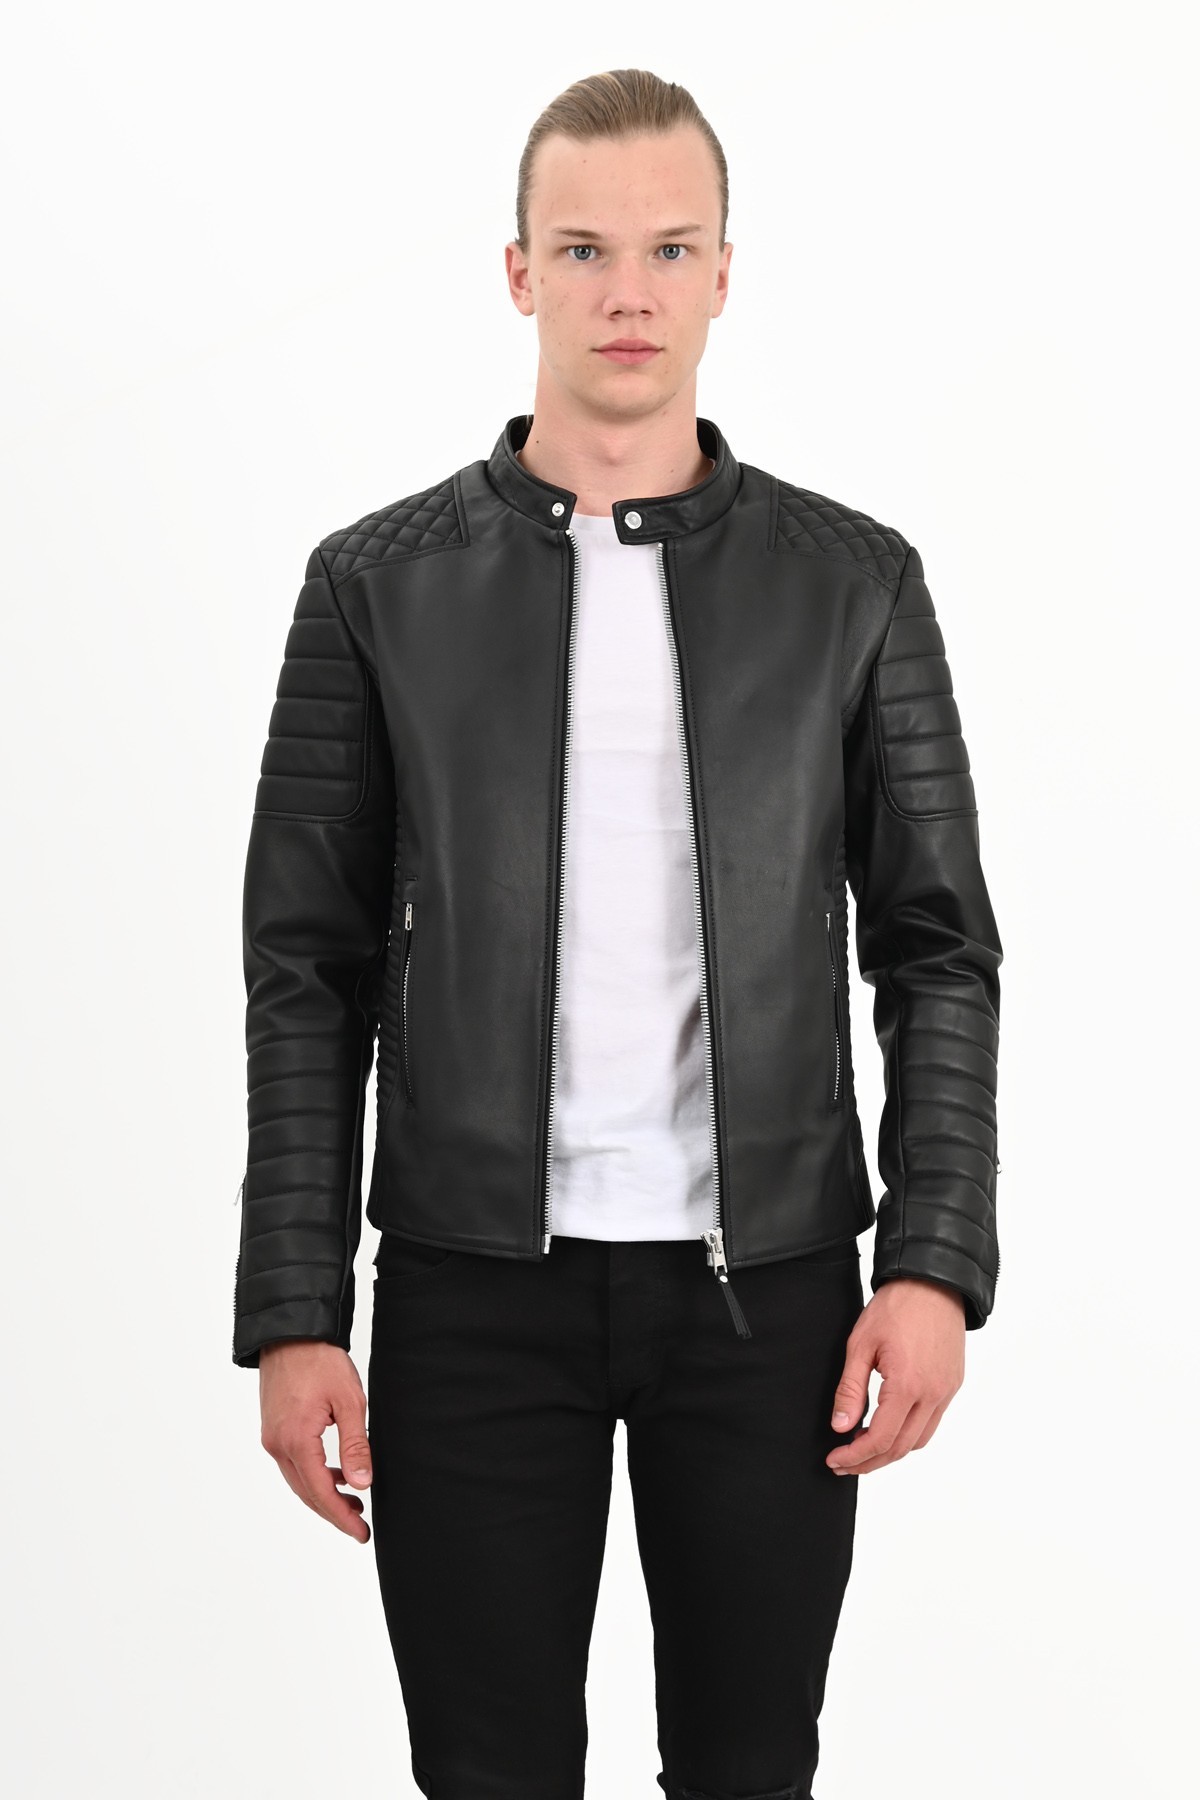 Mens fitted black biker leather jacket with silver metal hardware